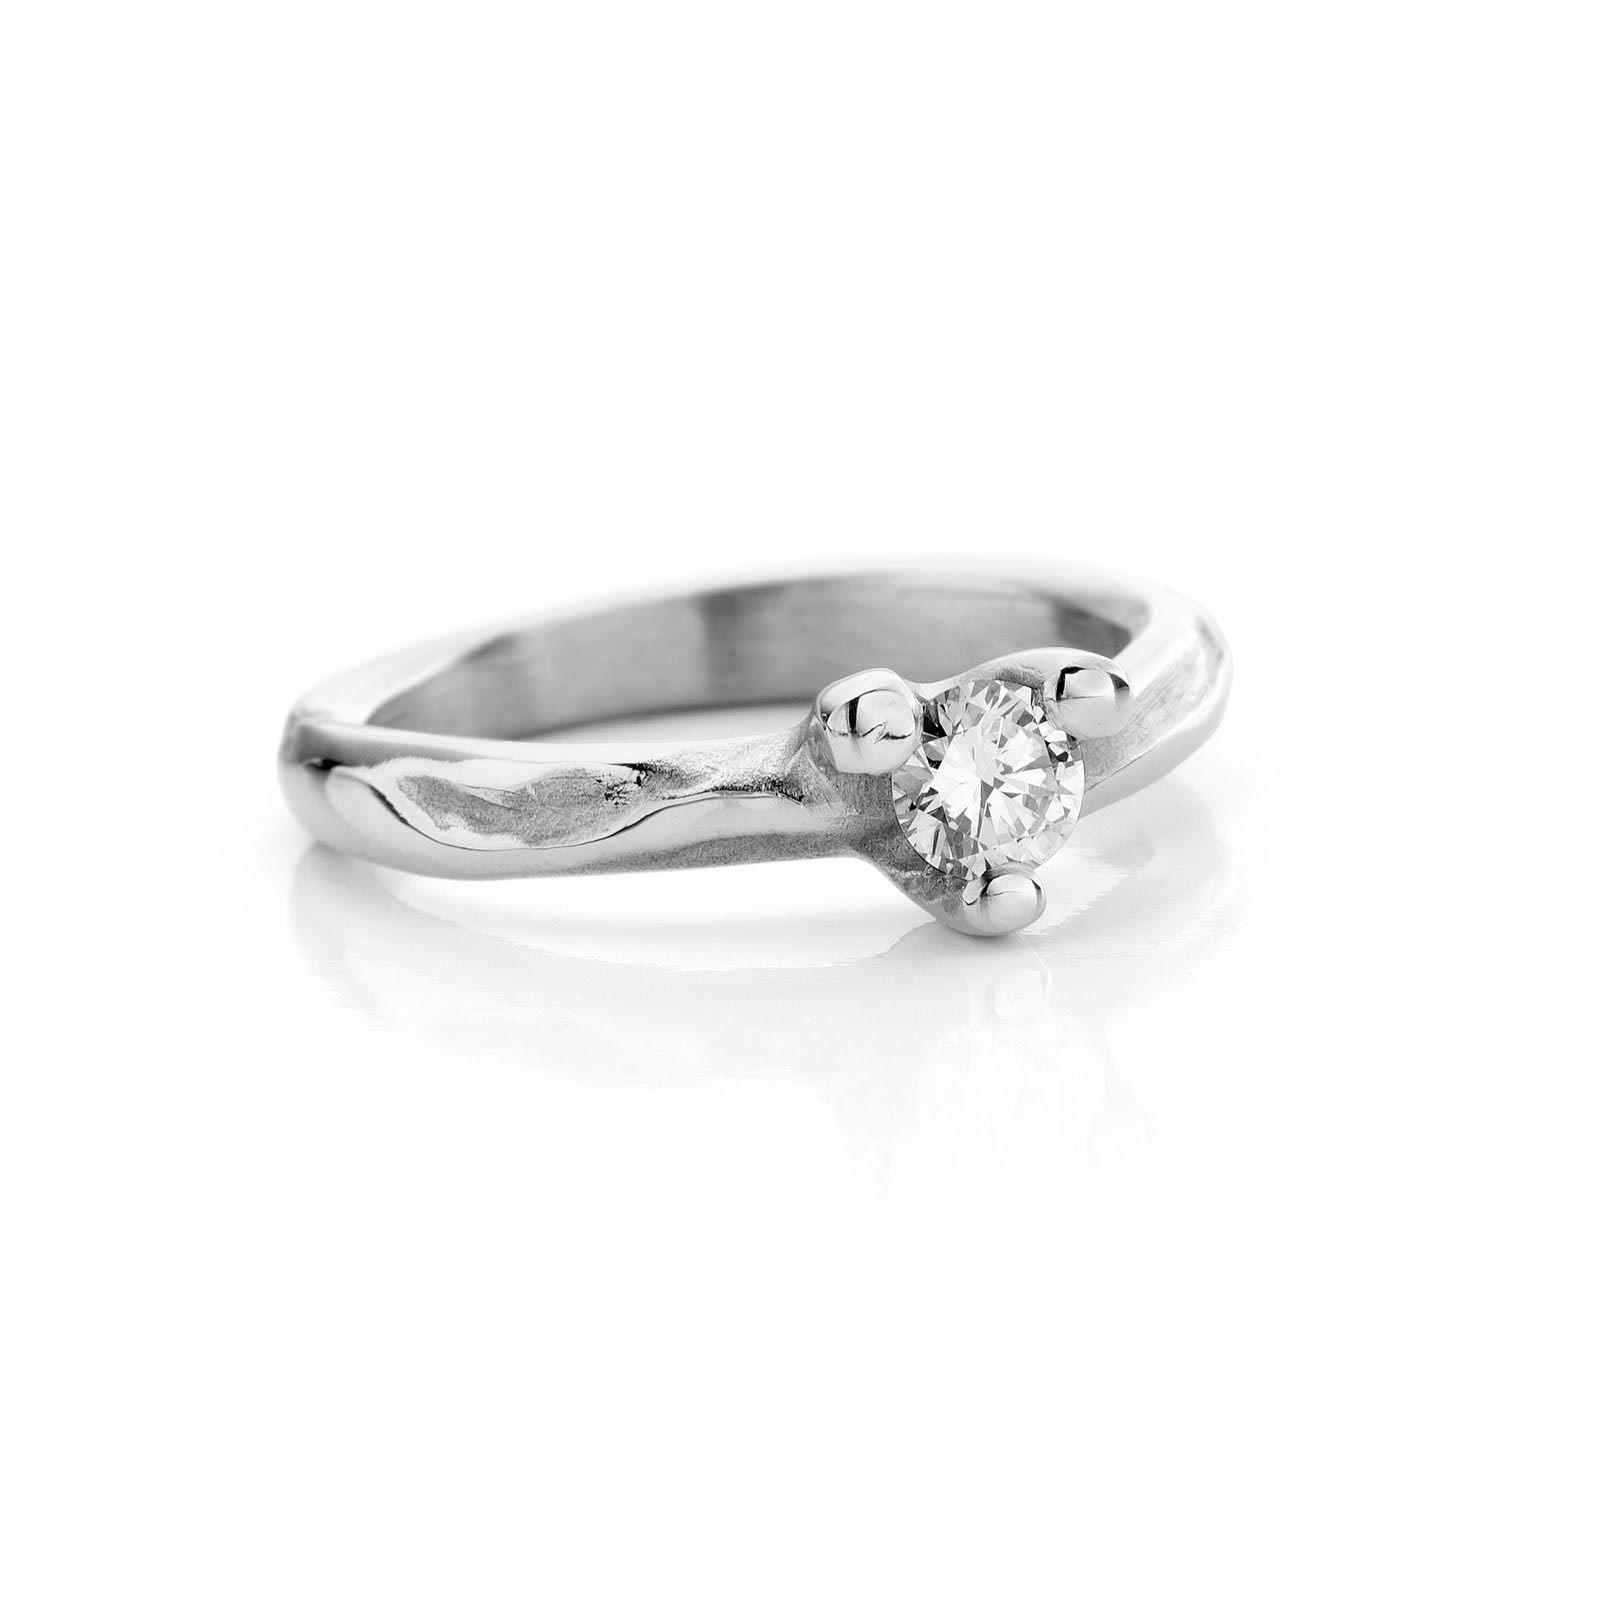 Tanishq White Gold Diamond Finger Ring Price Starting From Rs 18,880 | Find  Verified Sellers at Justdial